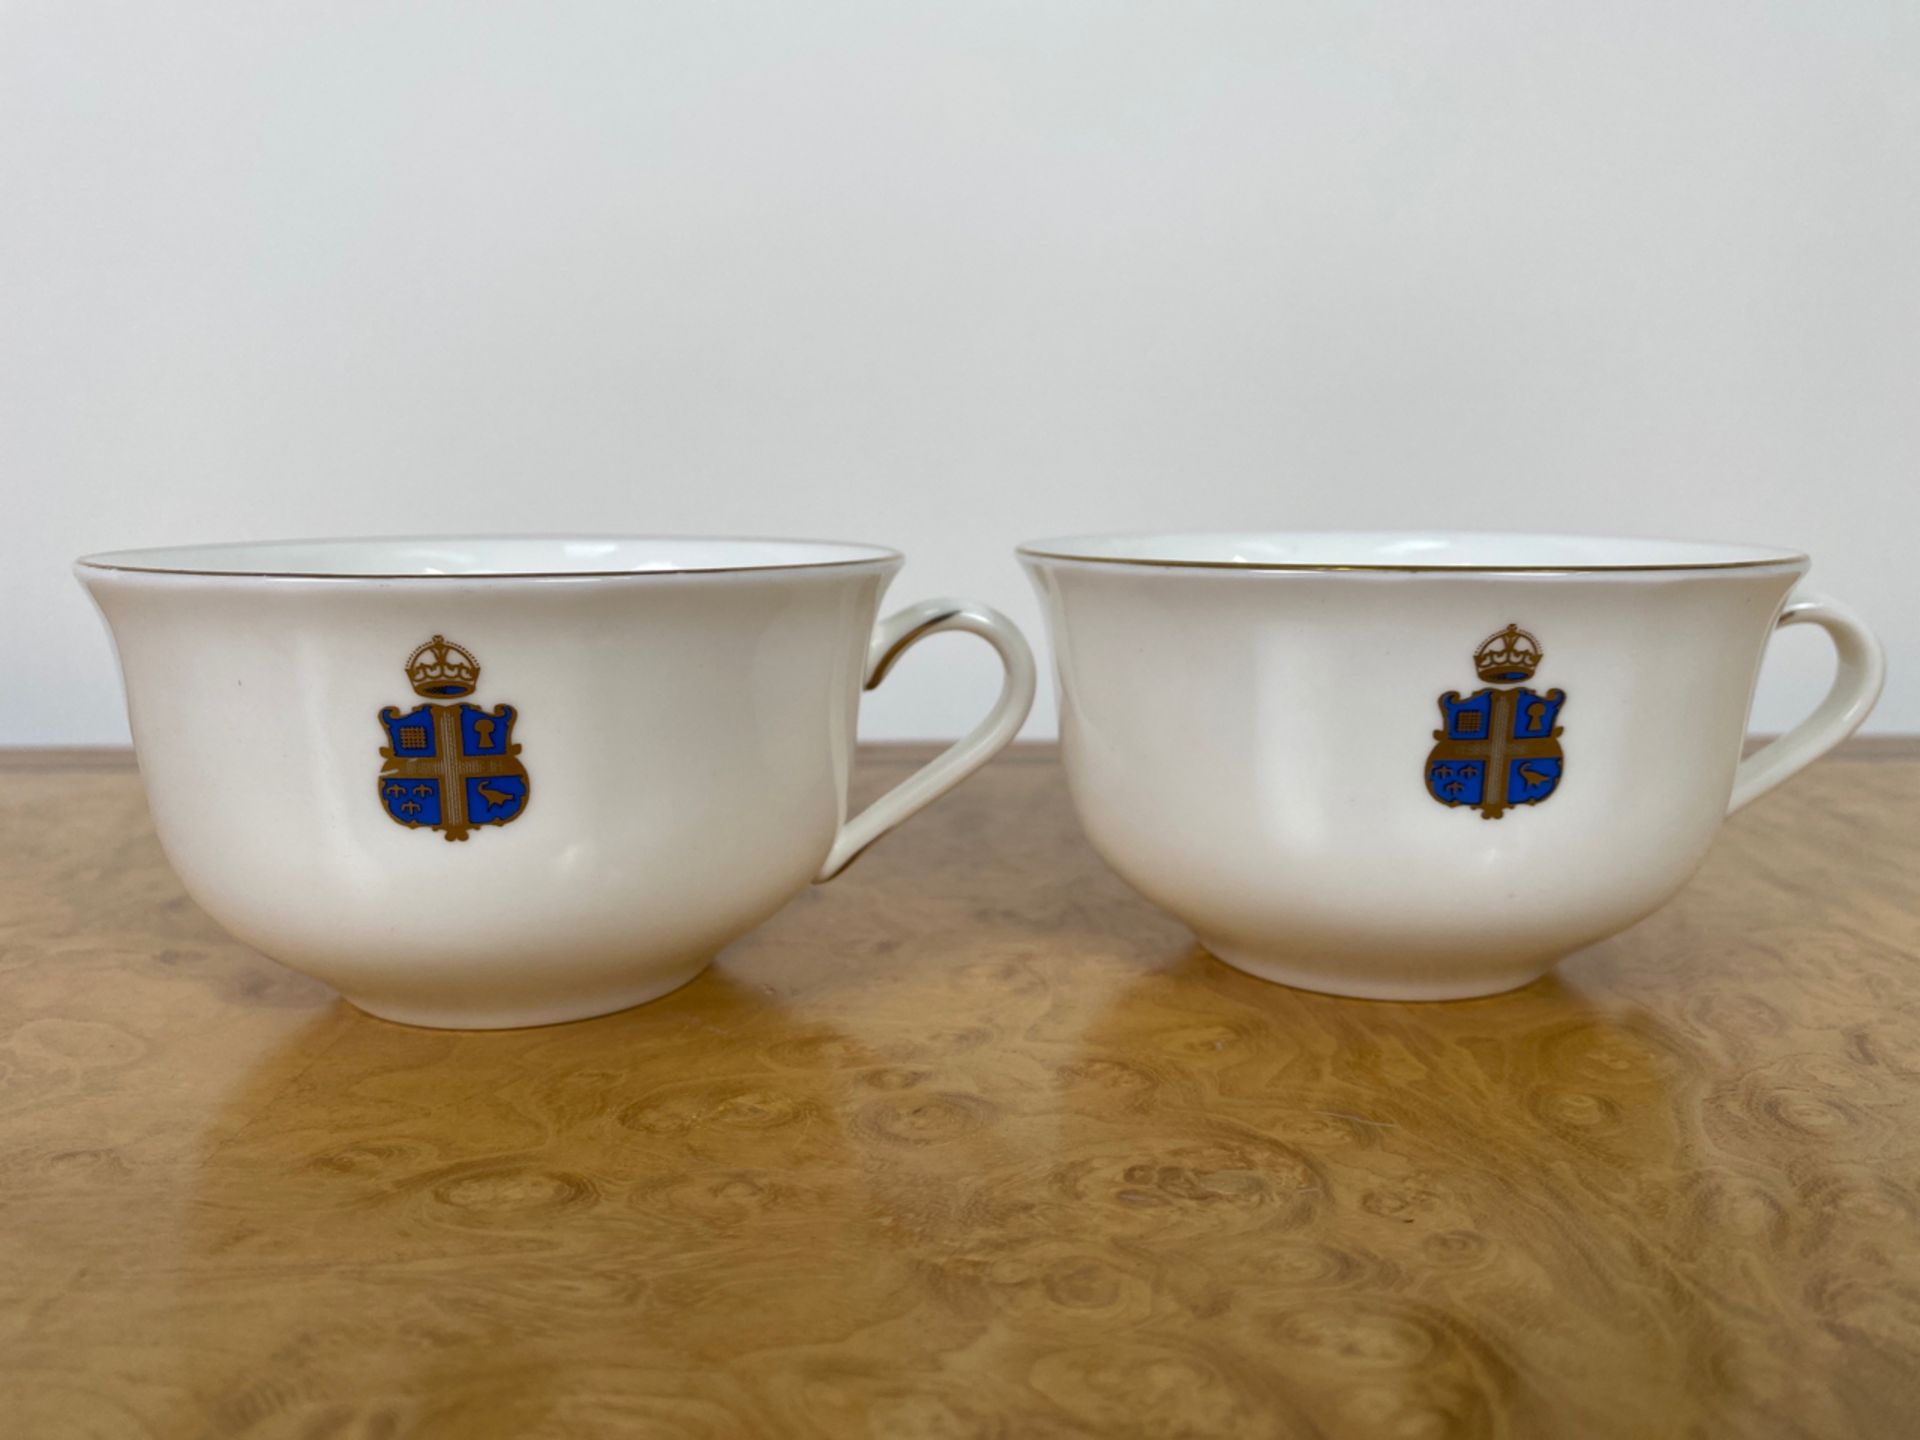 Set of Crested Crockery for Claridge's by Chommette 1884 - Image 13 of 44